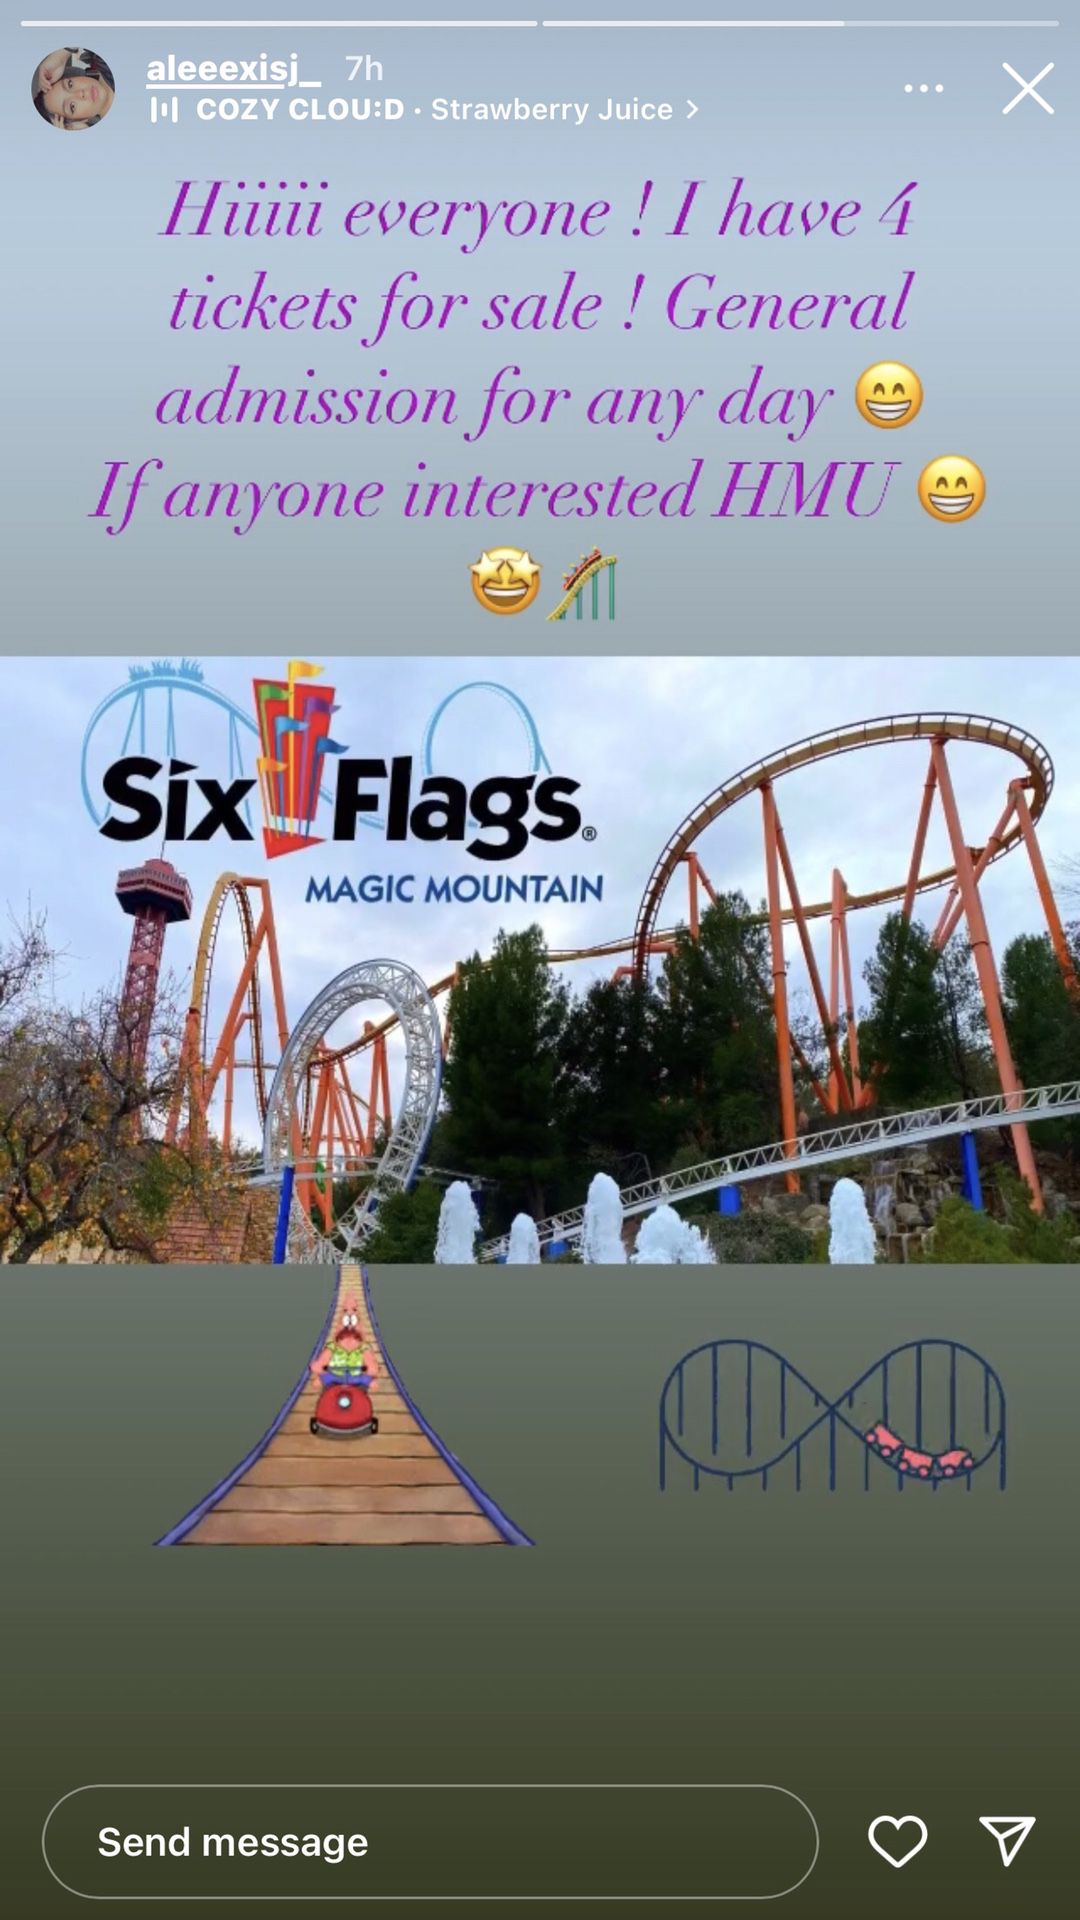 3 Six Flags Tickets For 200$